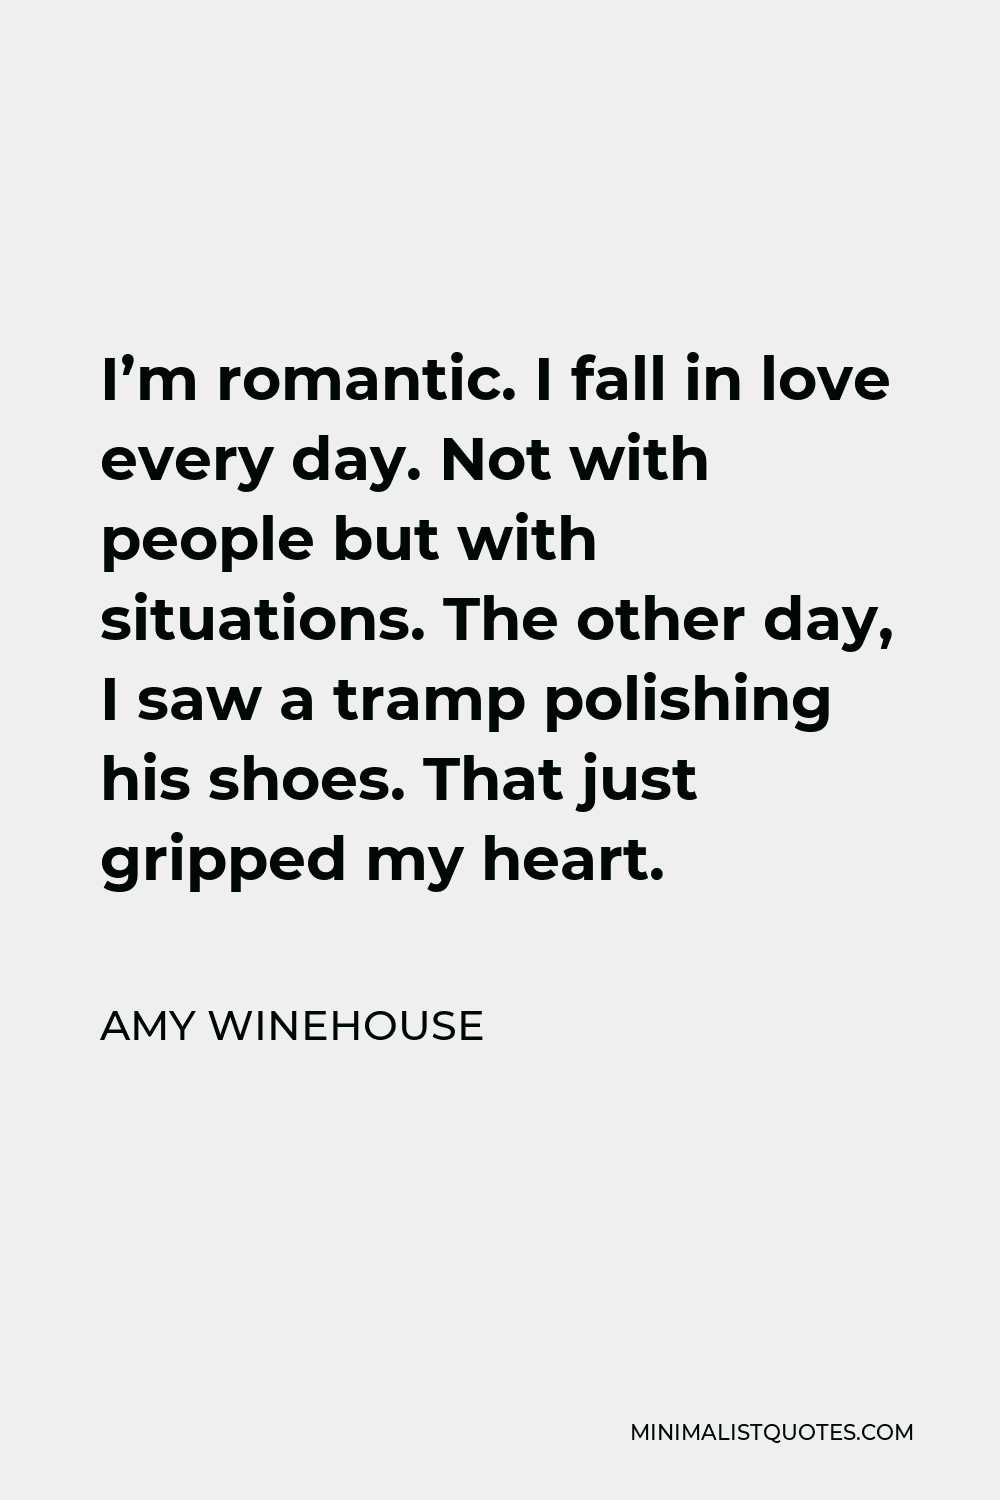 Amy Winehouse Quote - I’m romantic. I fall in love every day. Not with people but with situations. The other day, I saw a tramp polishing his shoes. That just gripped my heart.